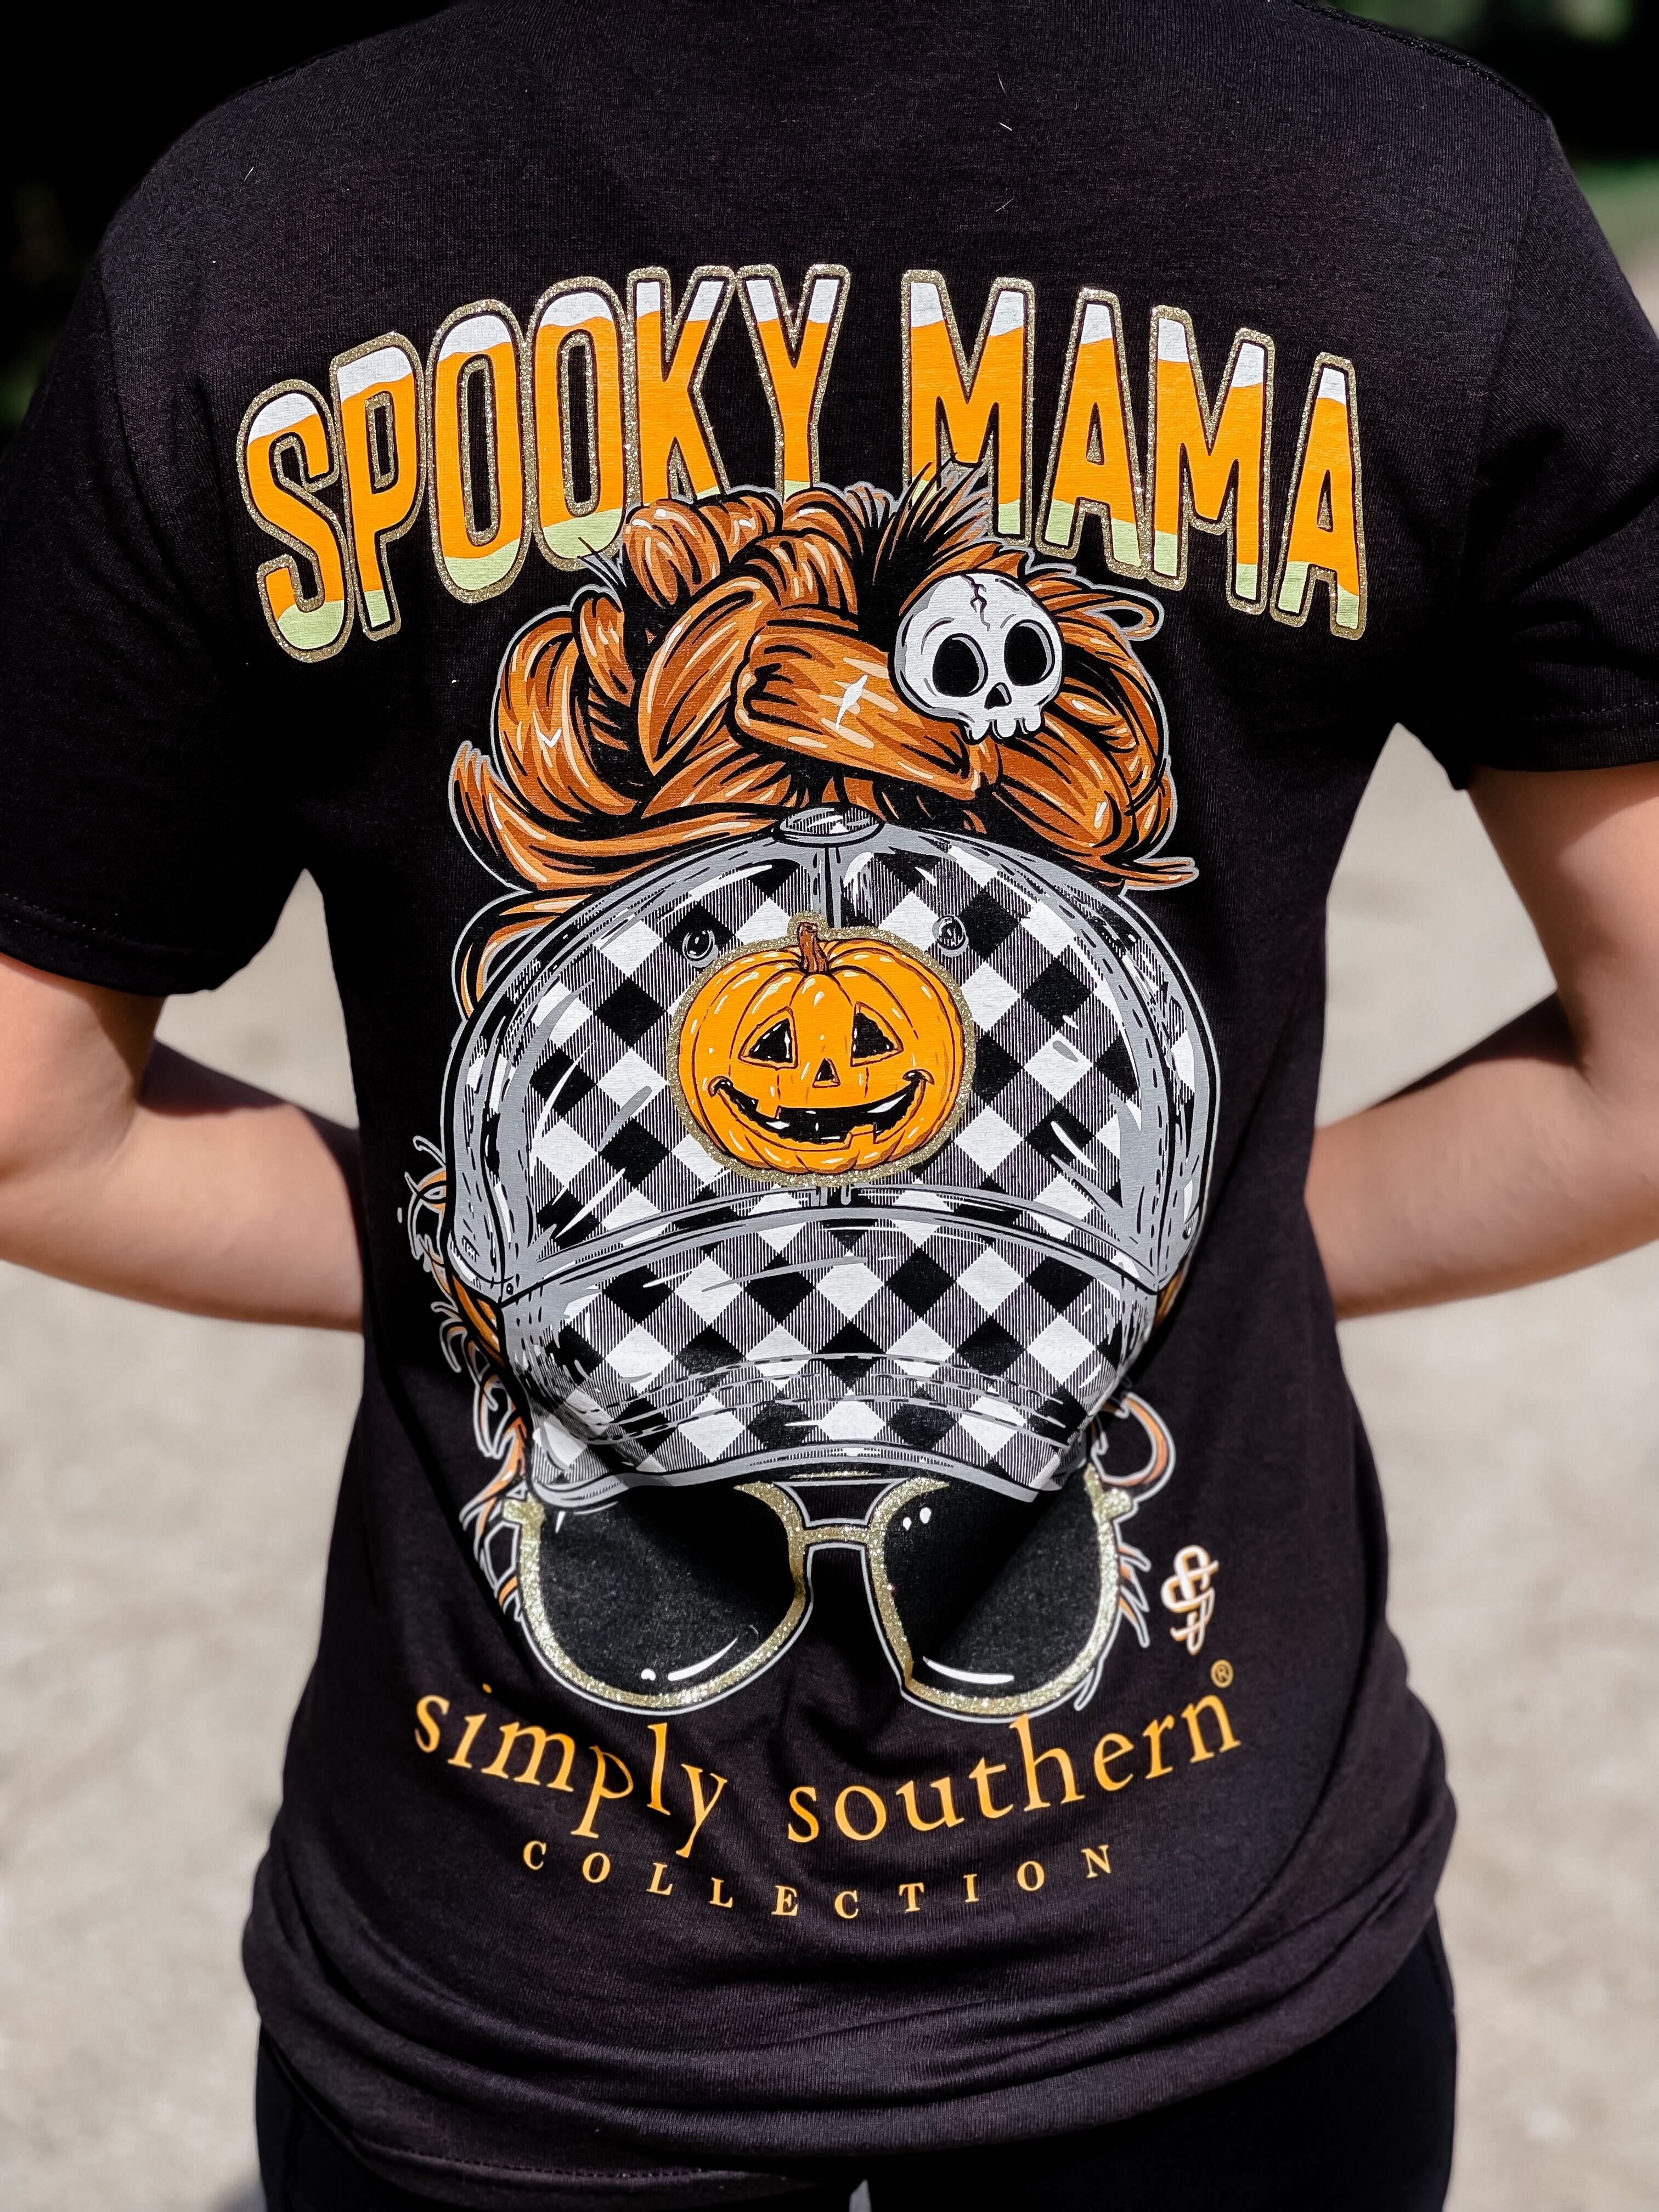 'Spooky Mama' Short Sleeve Tee by Simply Southern